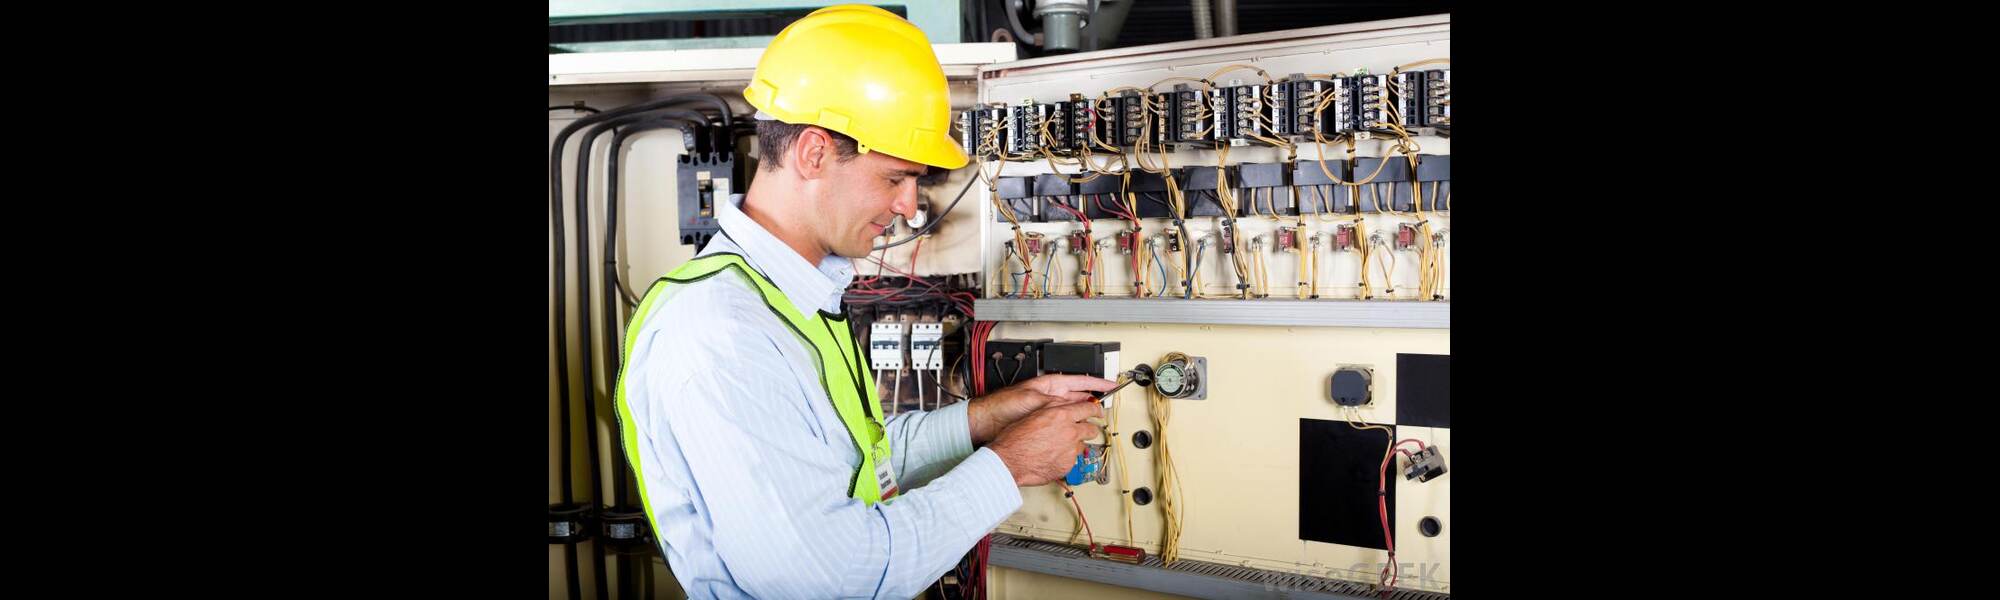 Warehouse Electrical Services for Optimal Efficiency